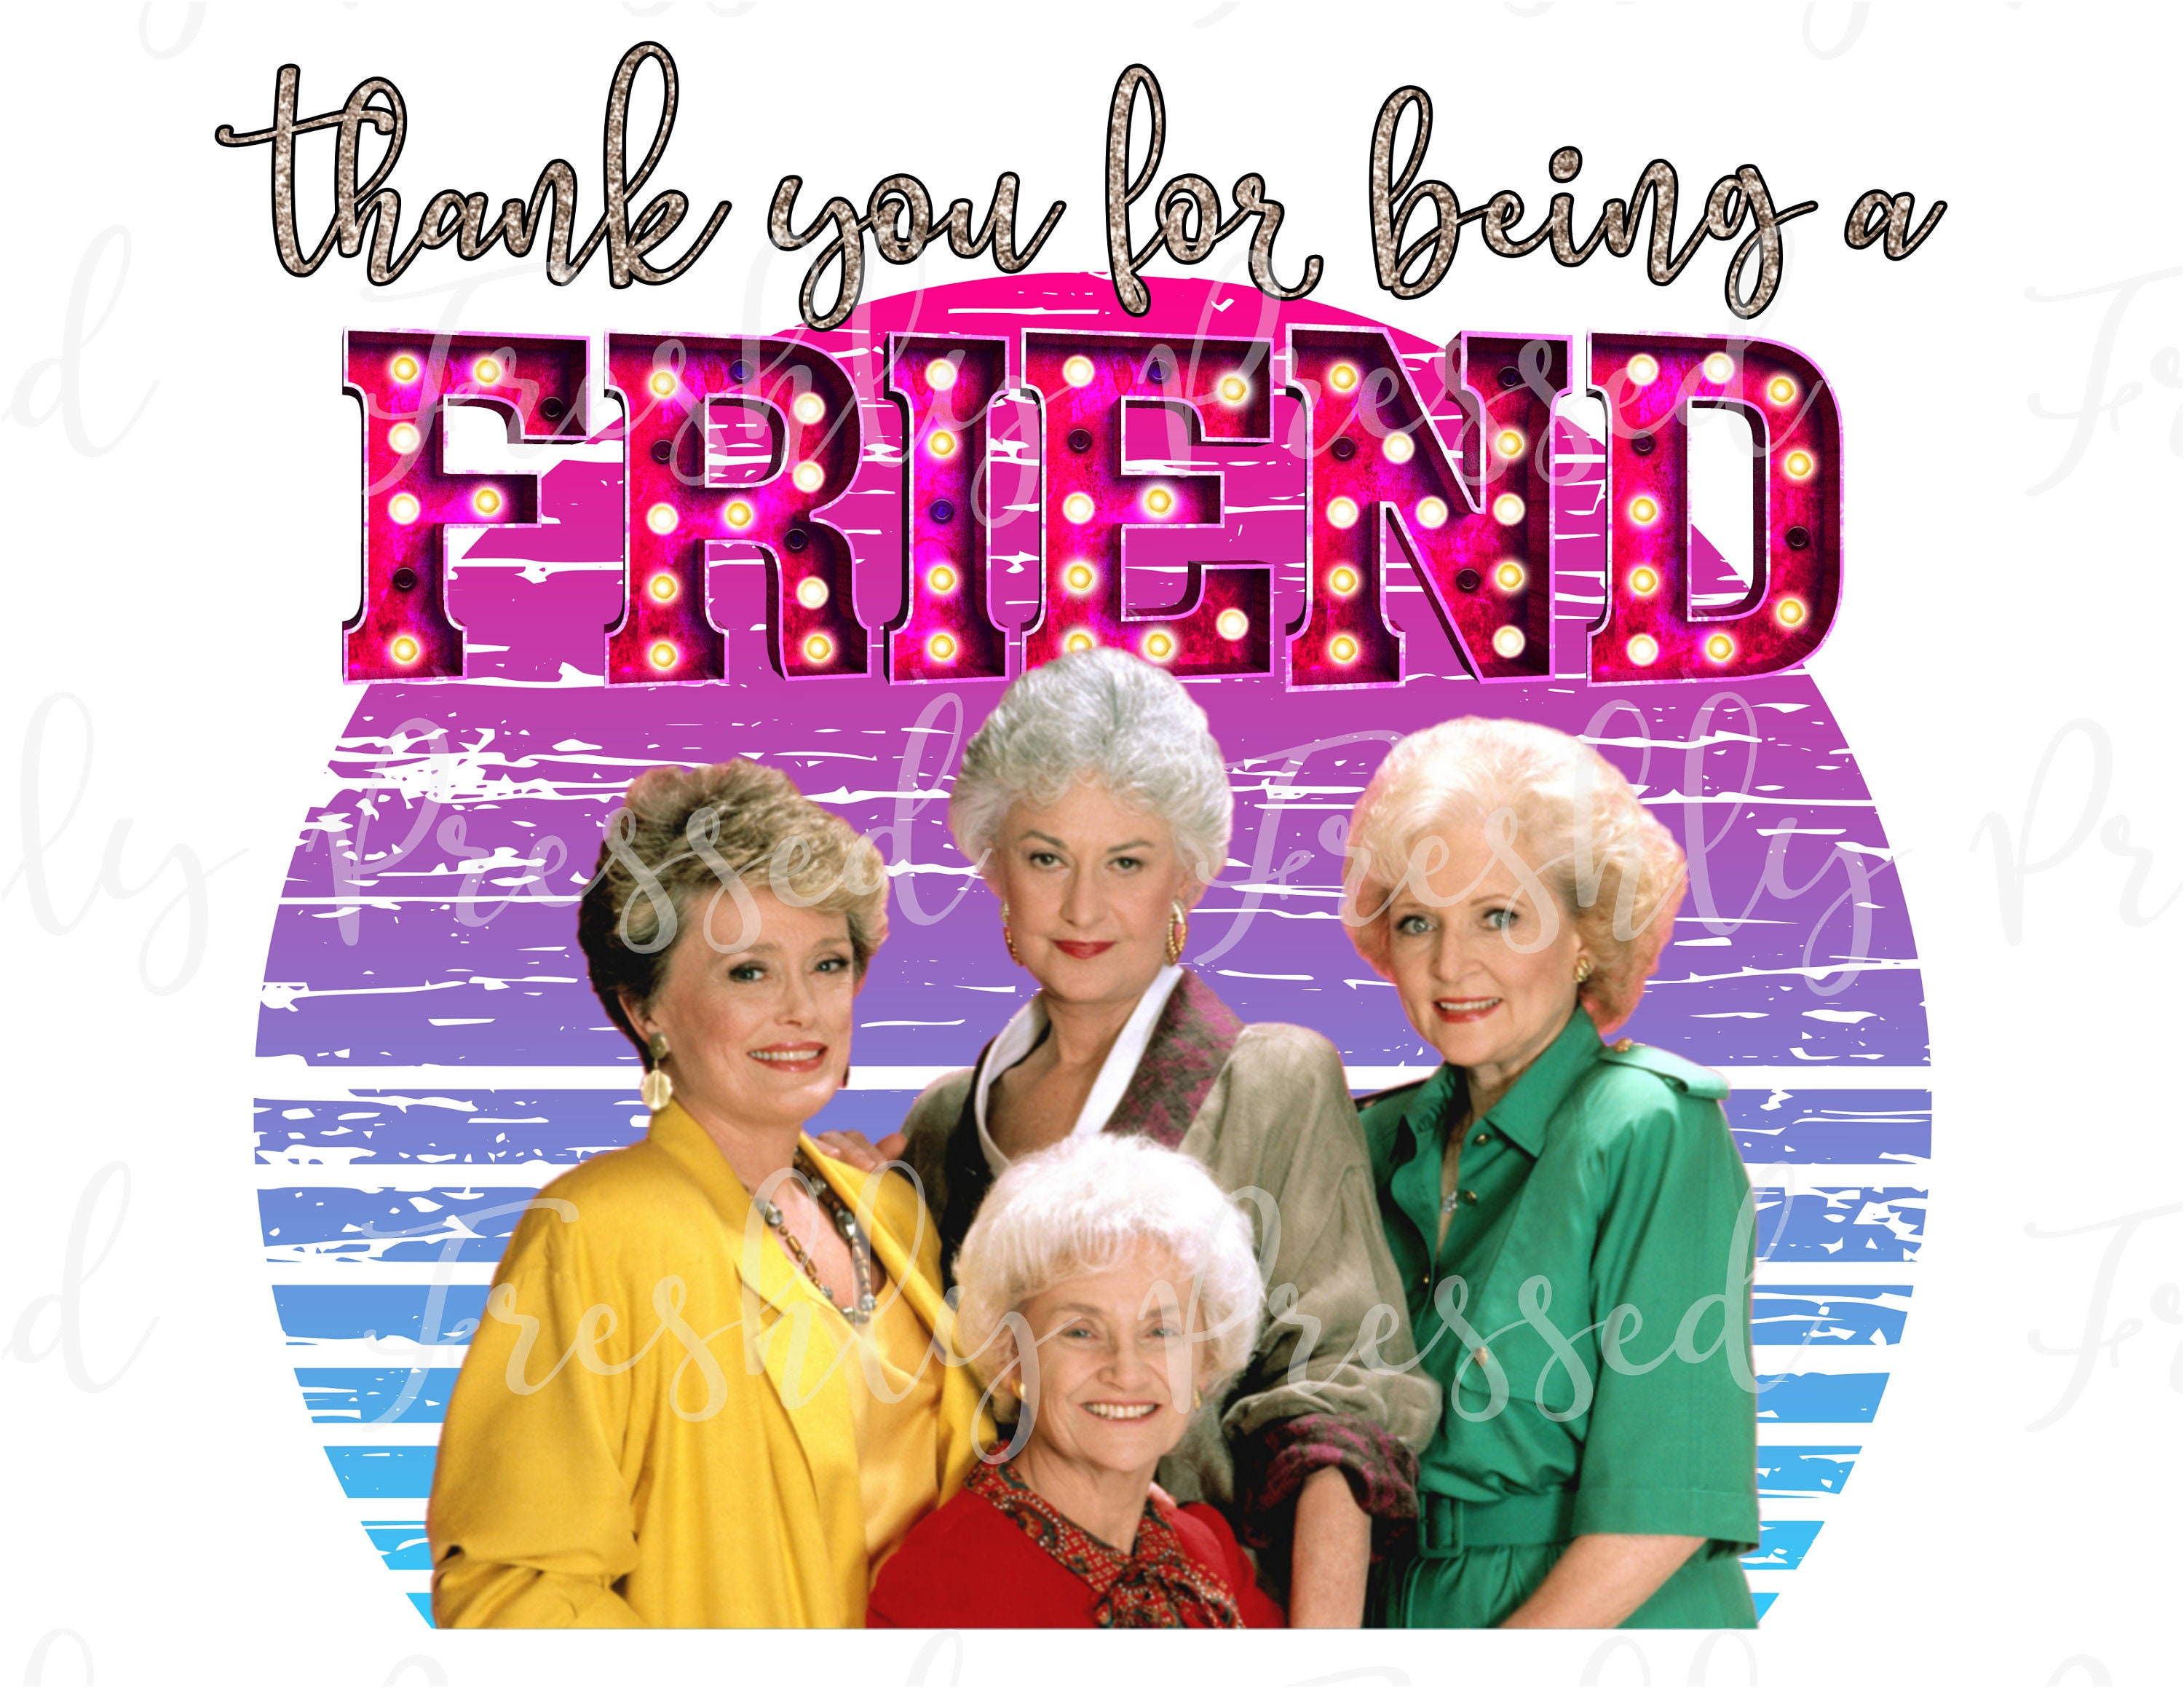 Thank You For Being A Friend The Golden Girls Teenage Mutant Ninja